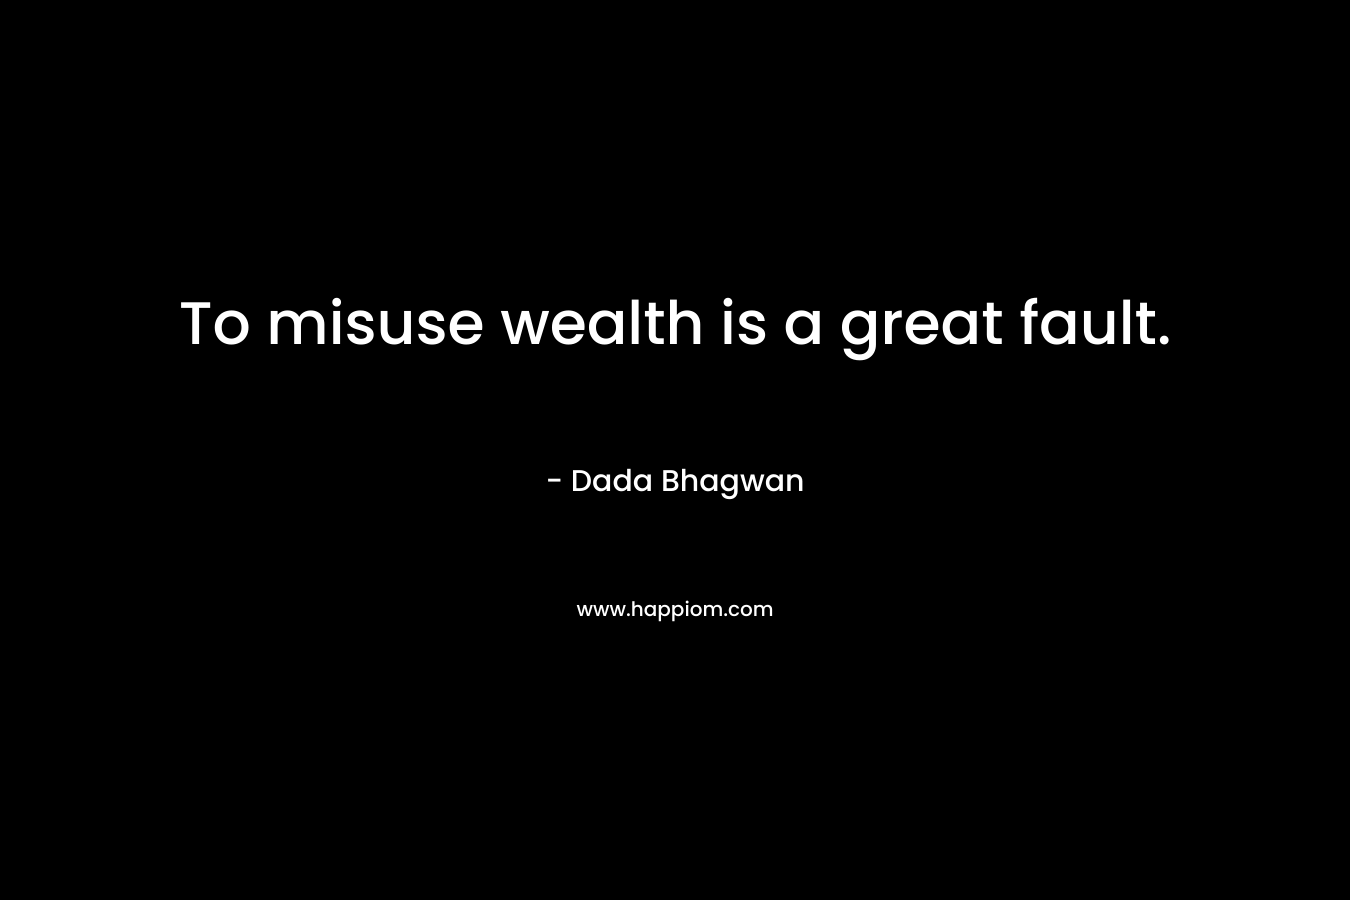 To misuse wealth is a great fault.